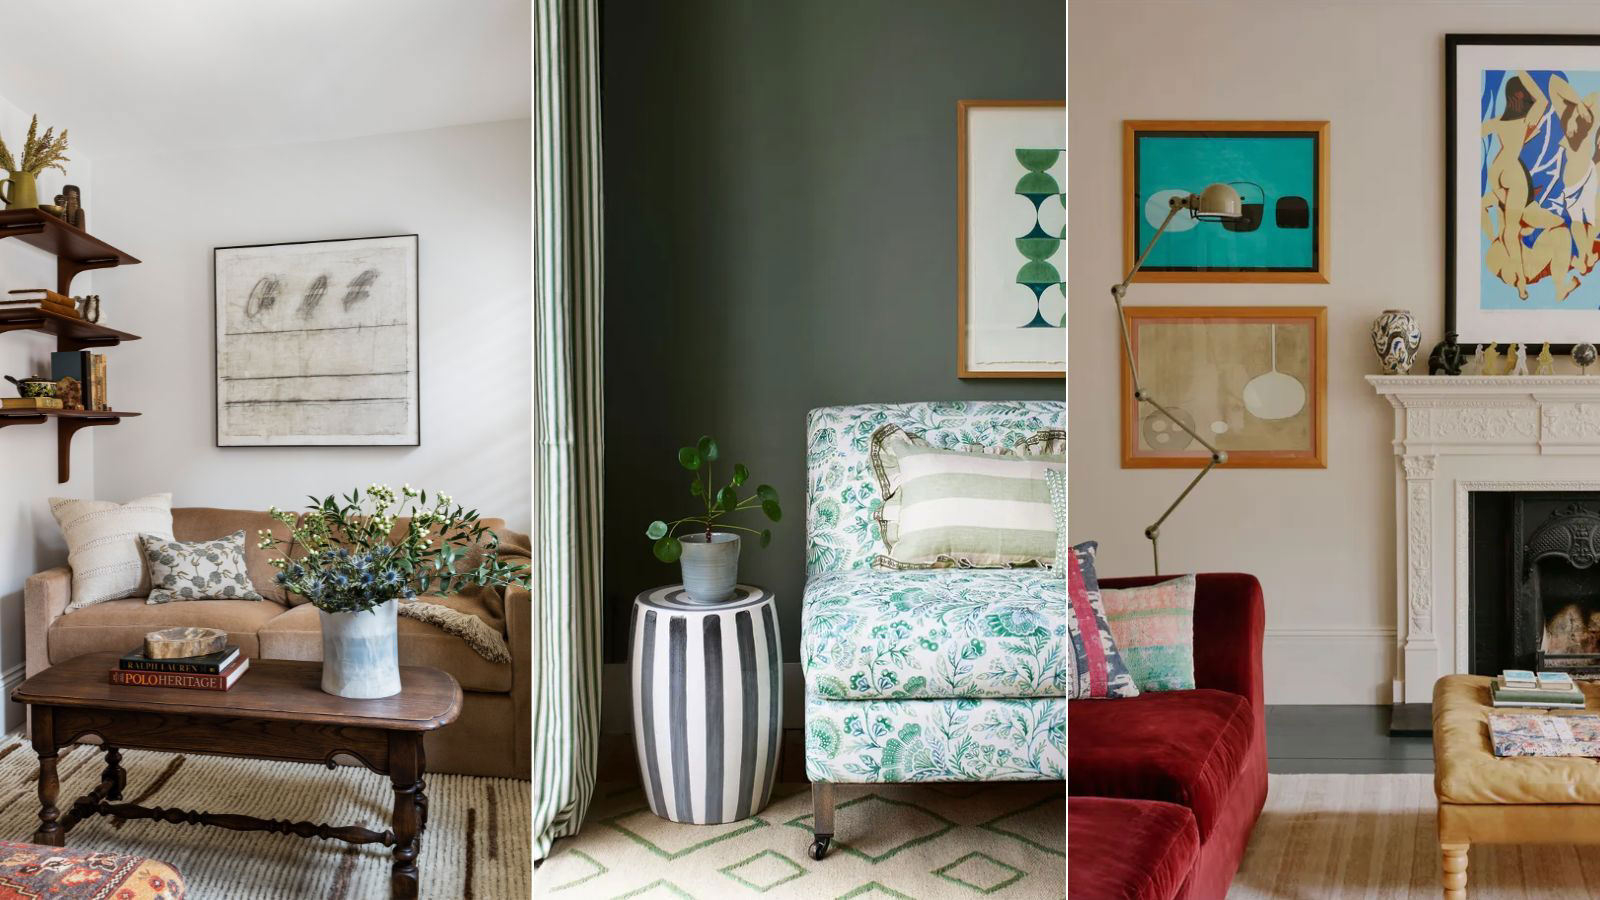 6 calming paint colors that will make your living room more serene